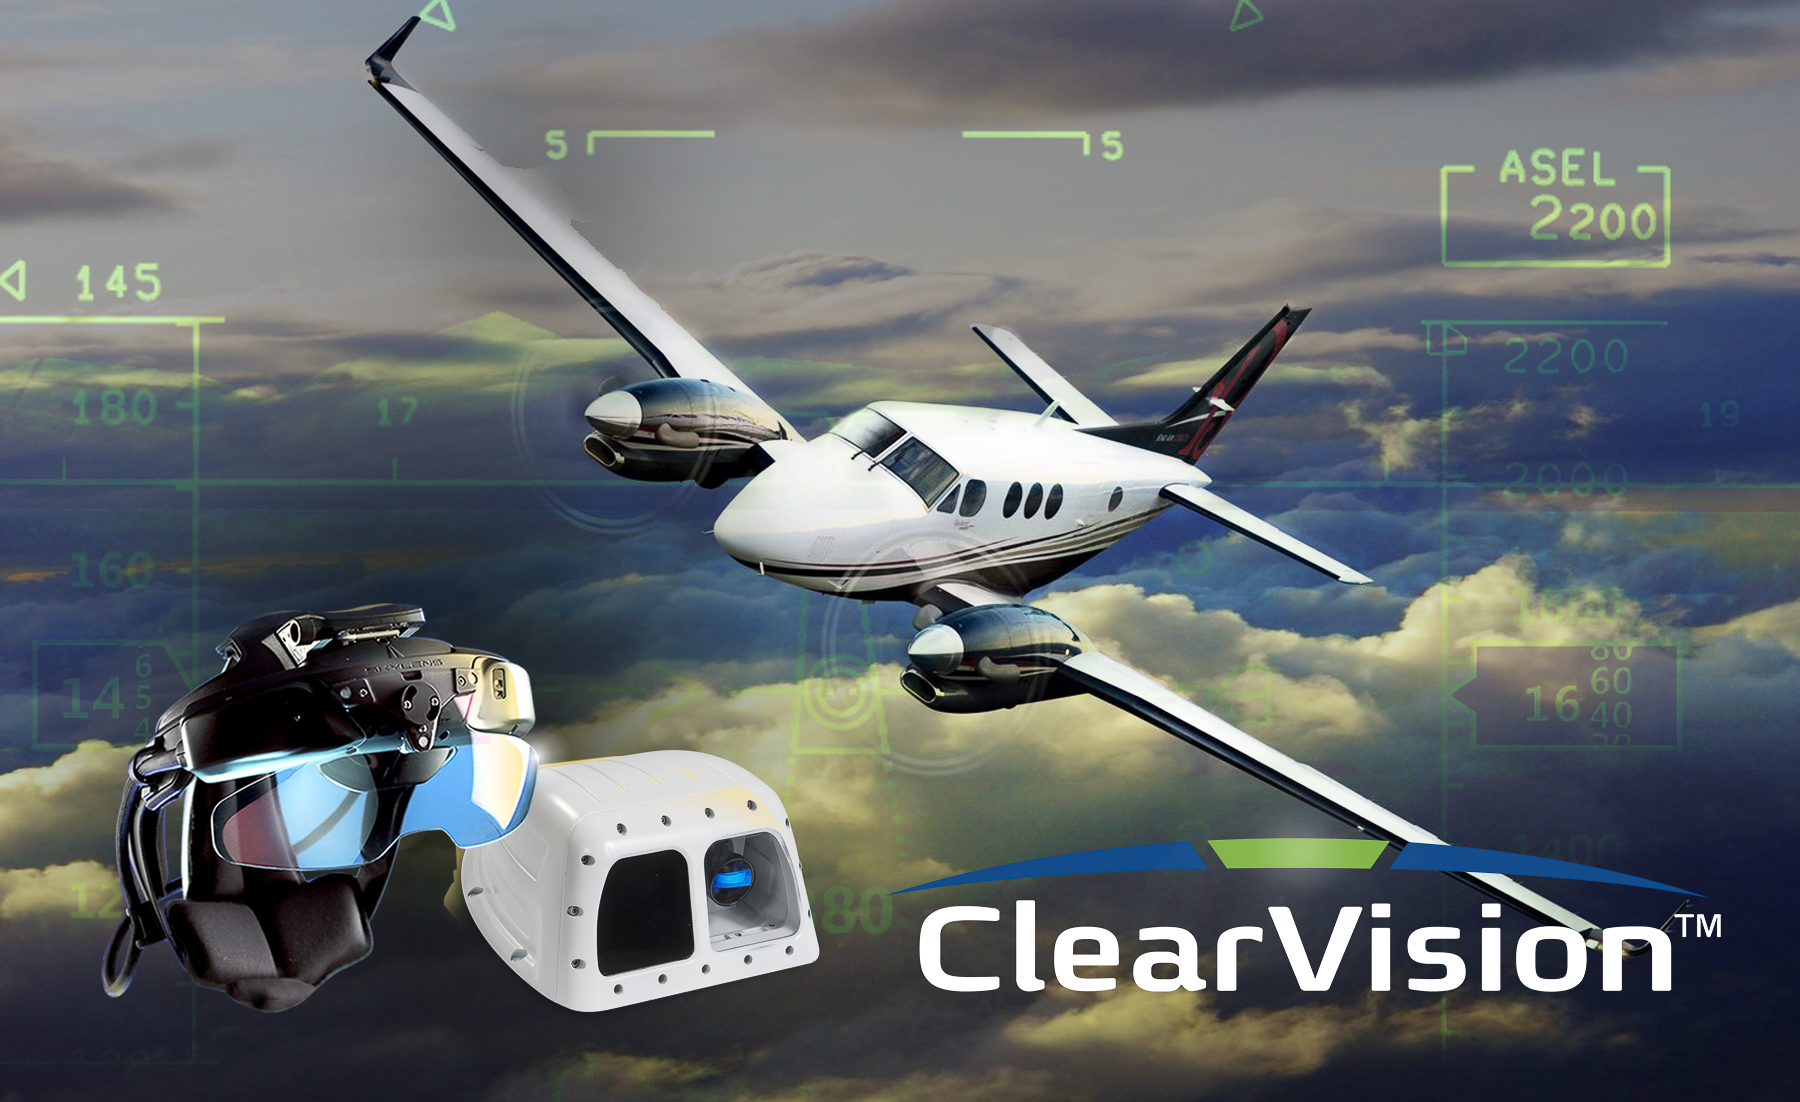 ClearVision on the King Air B200